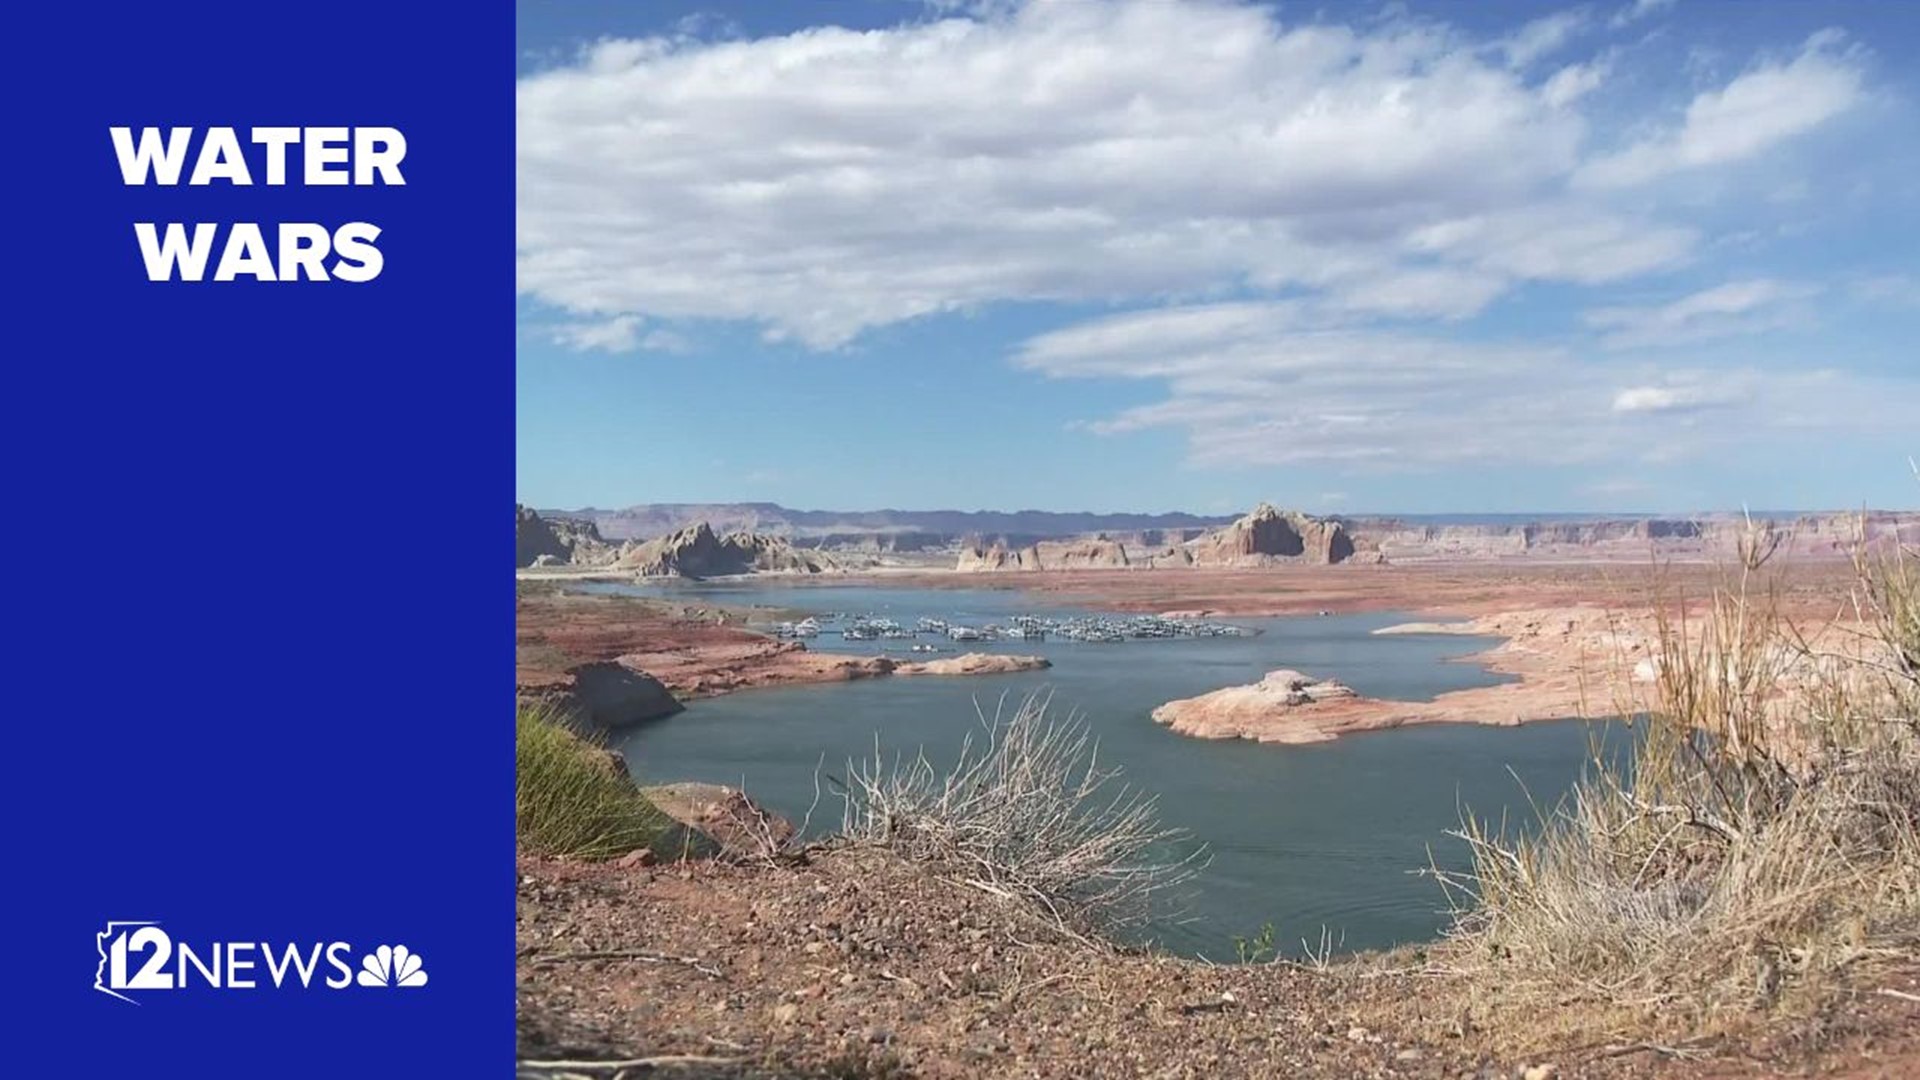 The worst-case scenario prediction from the Bureau of Reclamation shows that Lake Powell could drop below the minimum power pool as soon as July 2023.